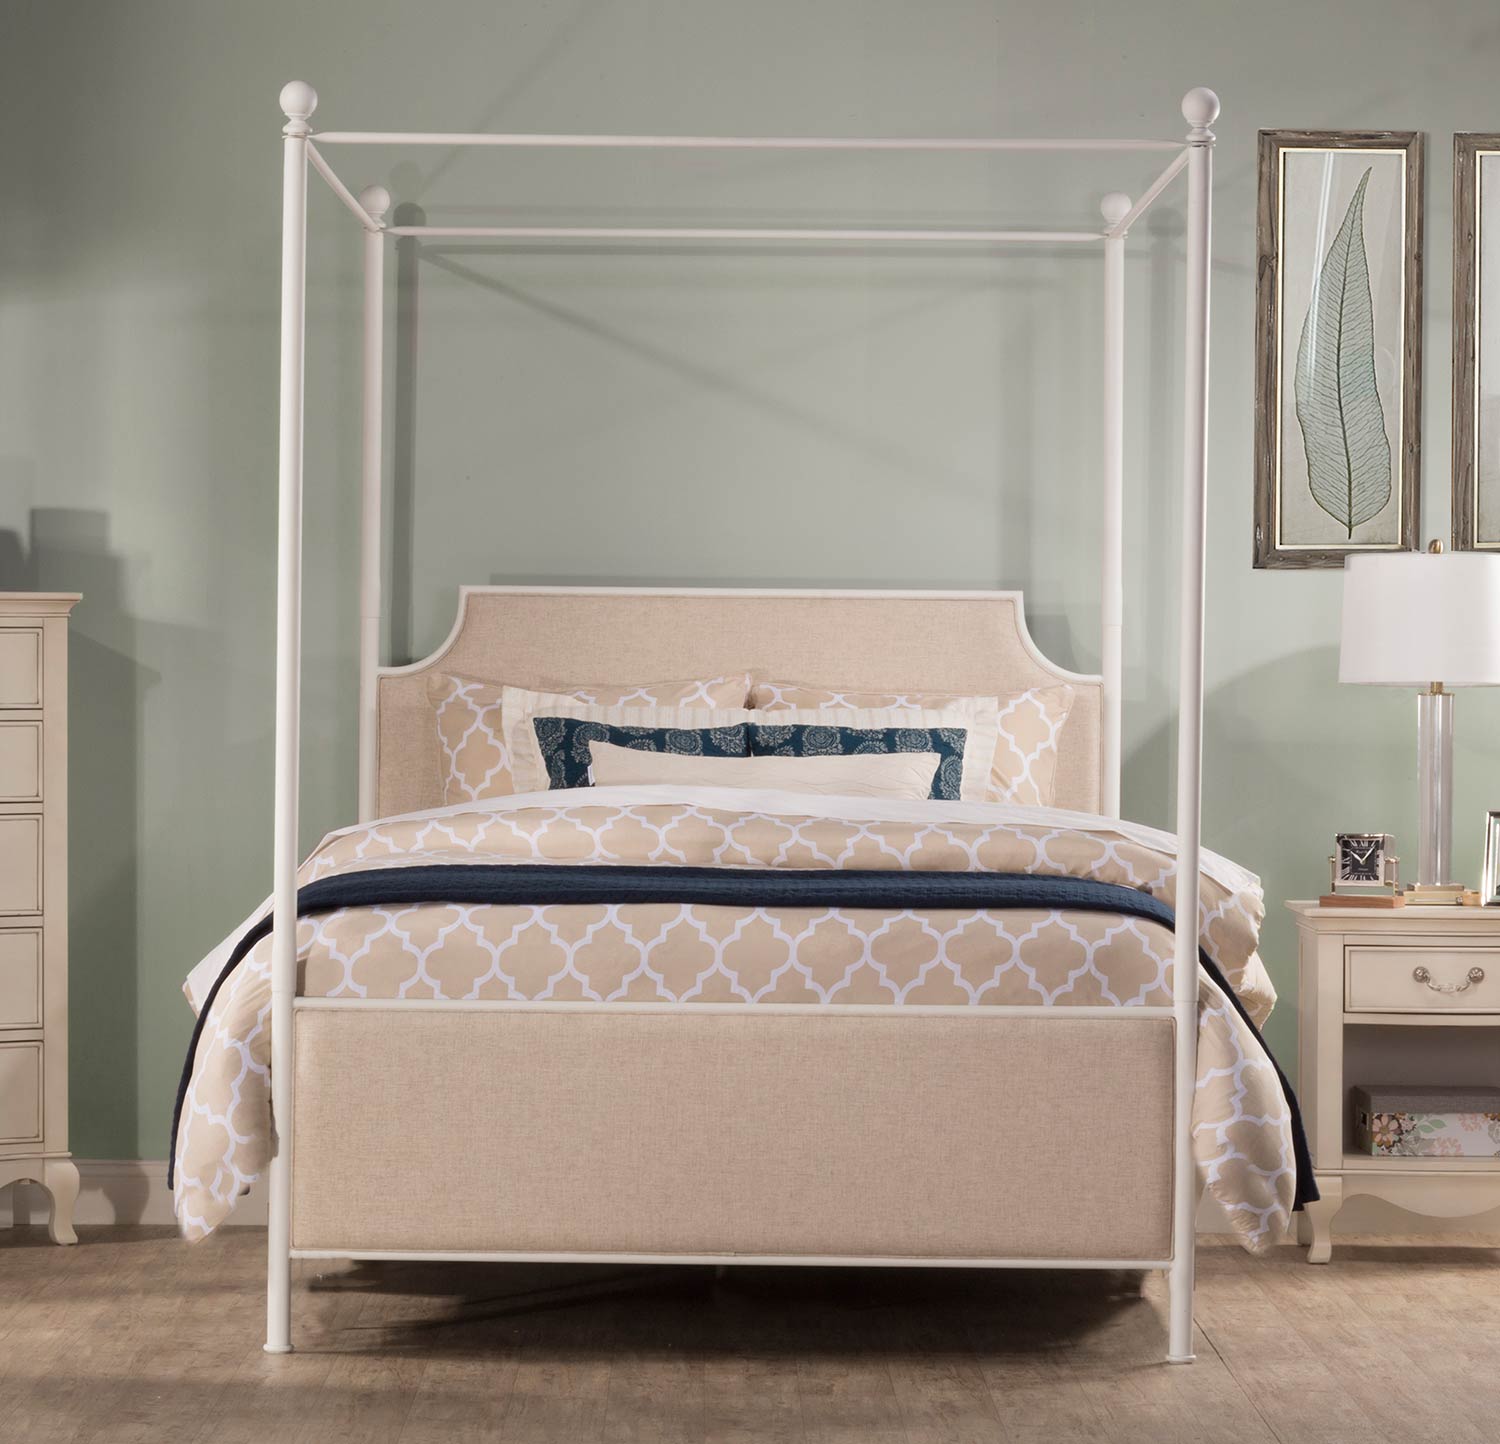 Hillsdale McArthur Canopy Bed - Off-White - Oatmeal Linen Fabric